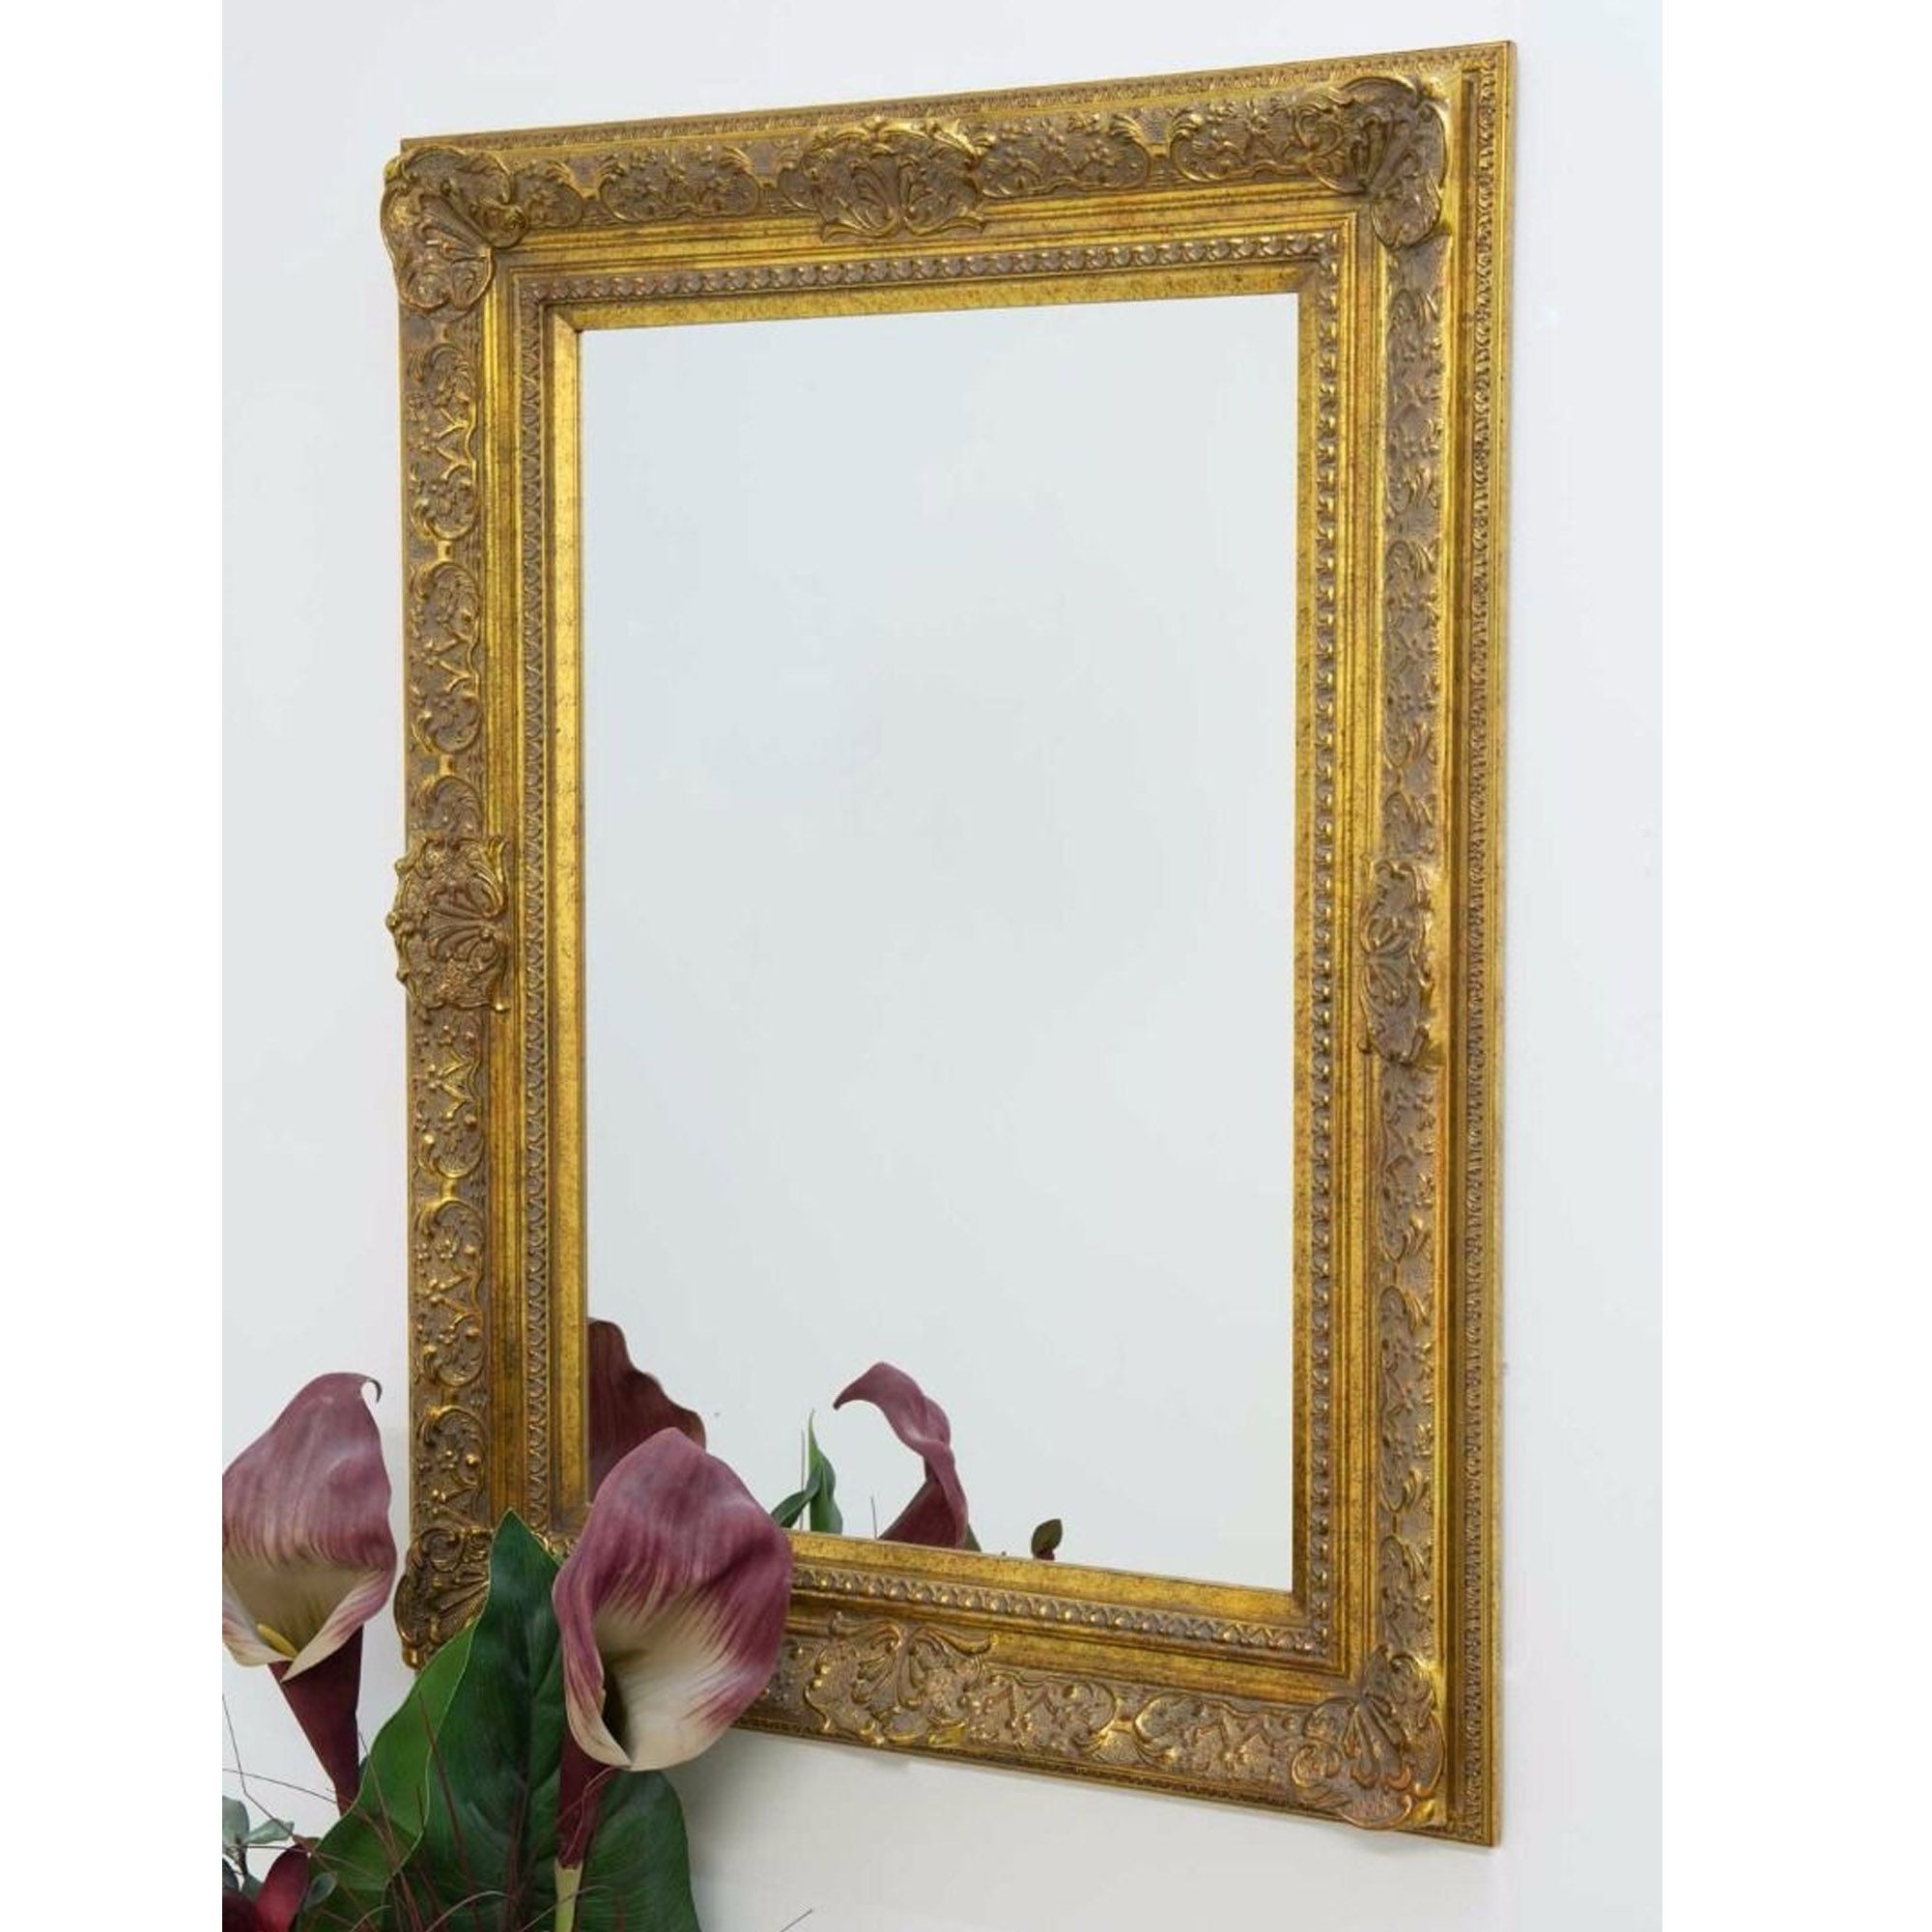 Large Decorative Ornate Gold Antique French Style Wall Mirror – French In Gold Decorative Wall Mirrors (View 7 of 15)